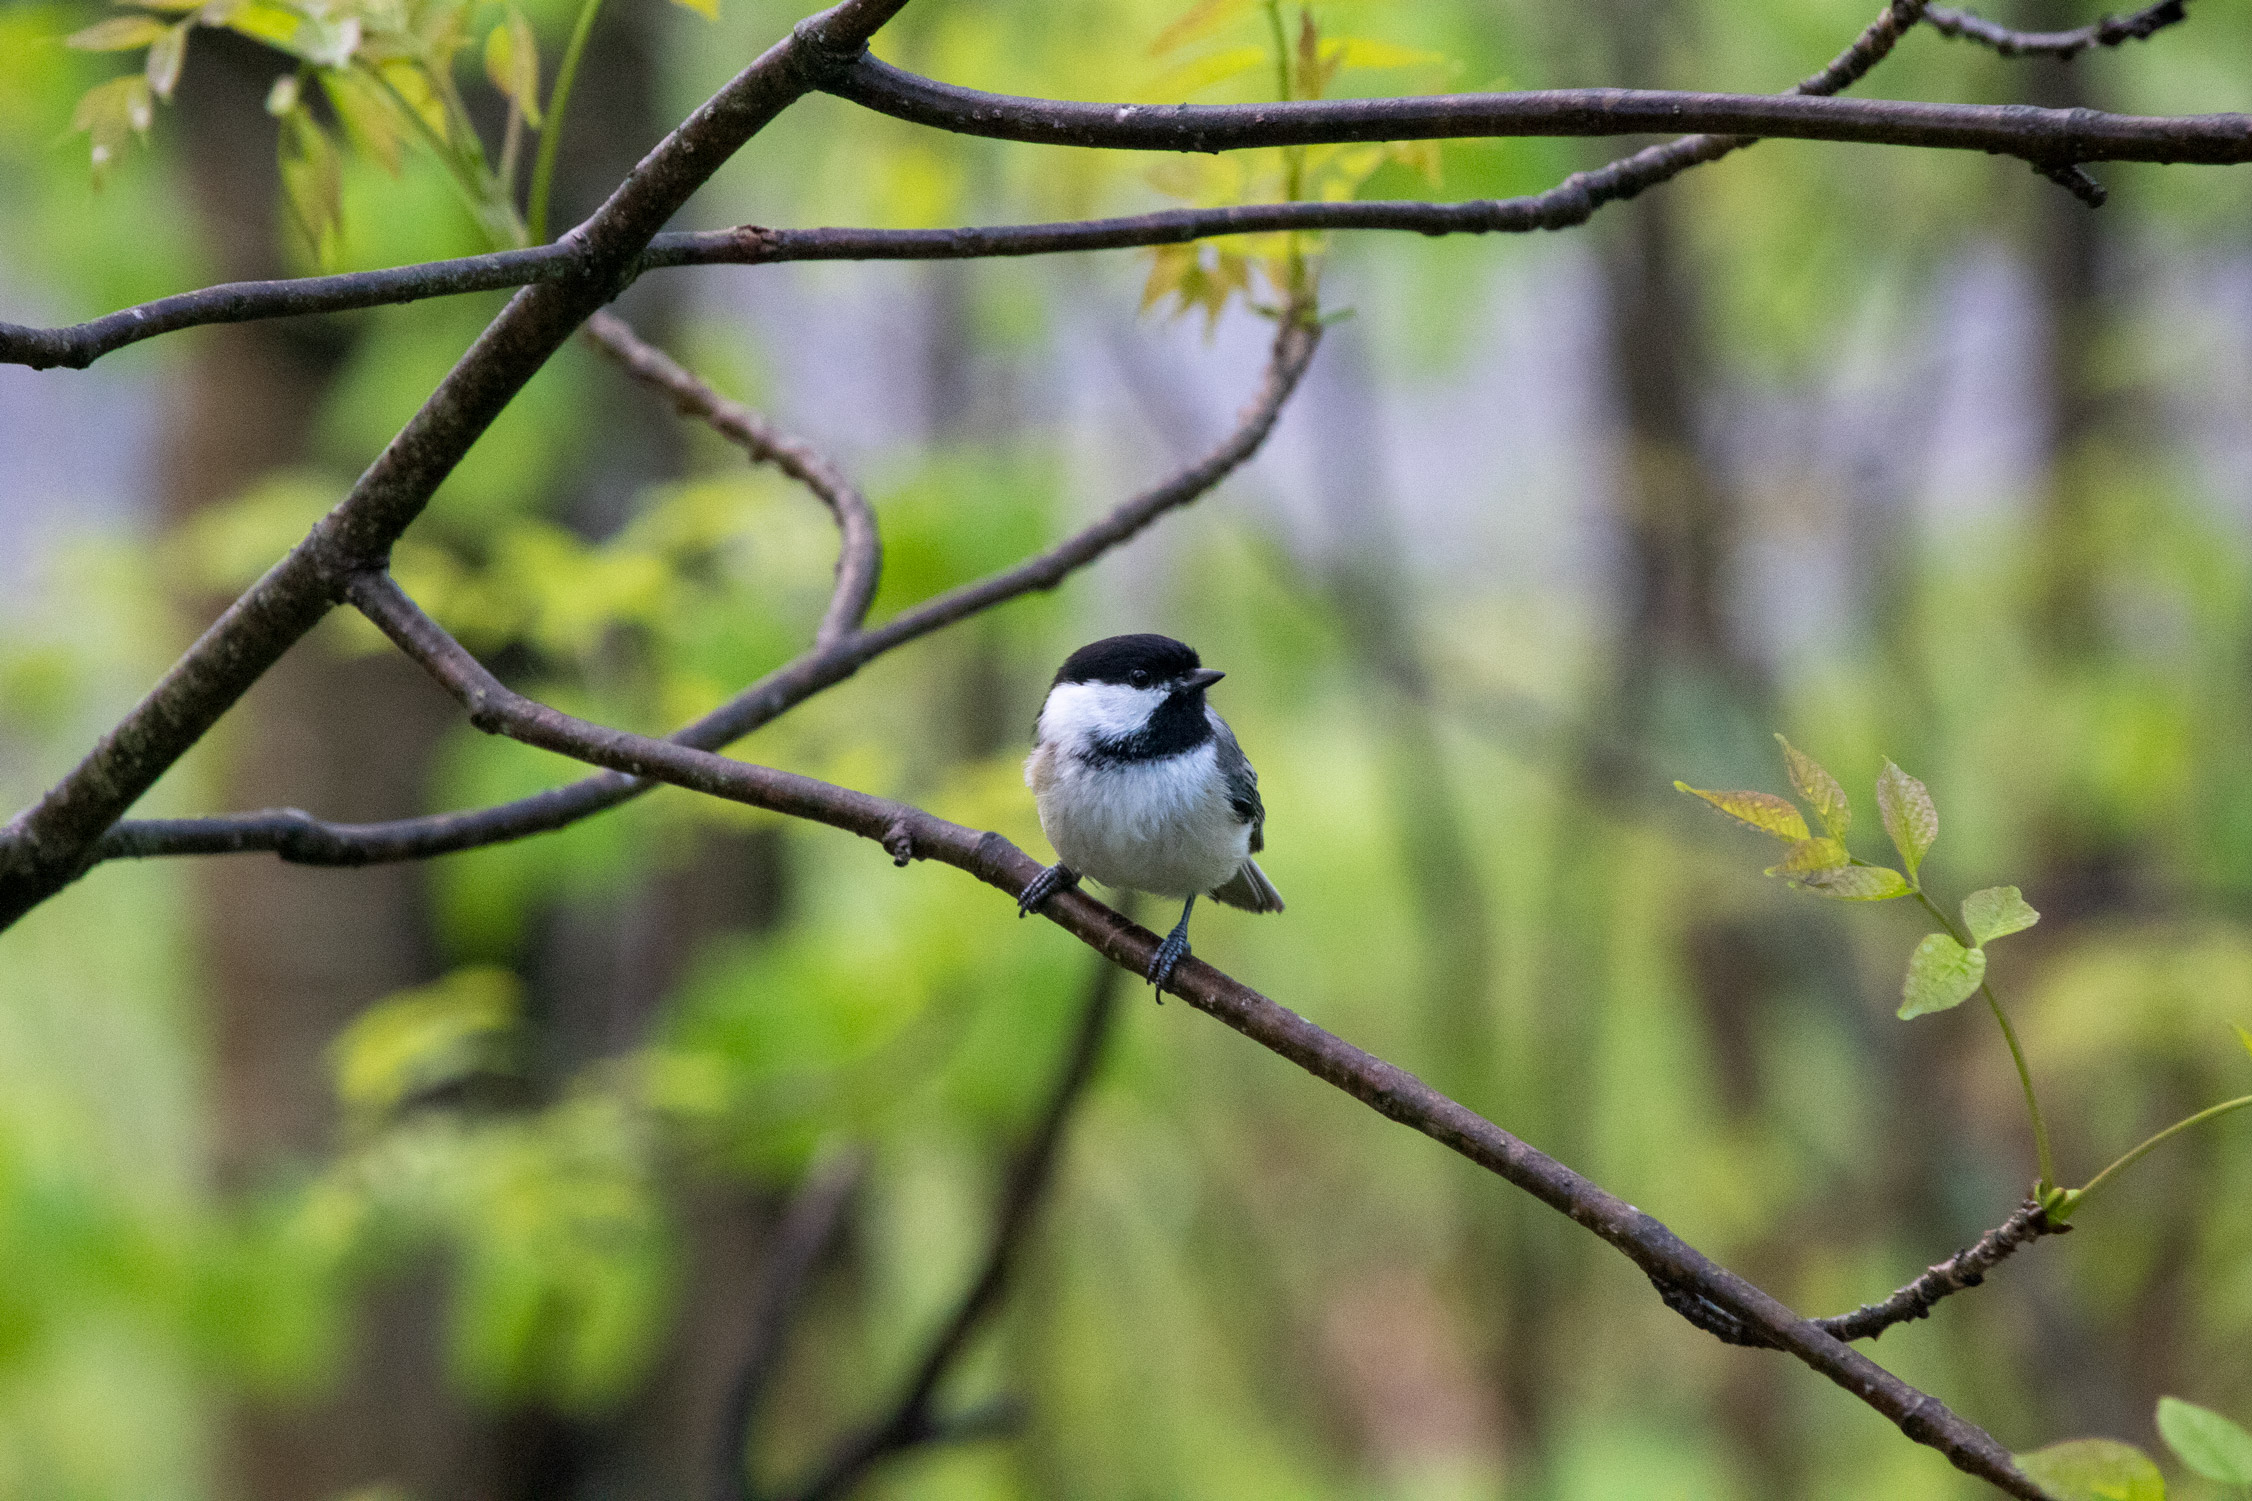 Small bird with the dark crown and throat patch typical of a North American Chickadee